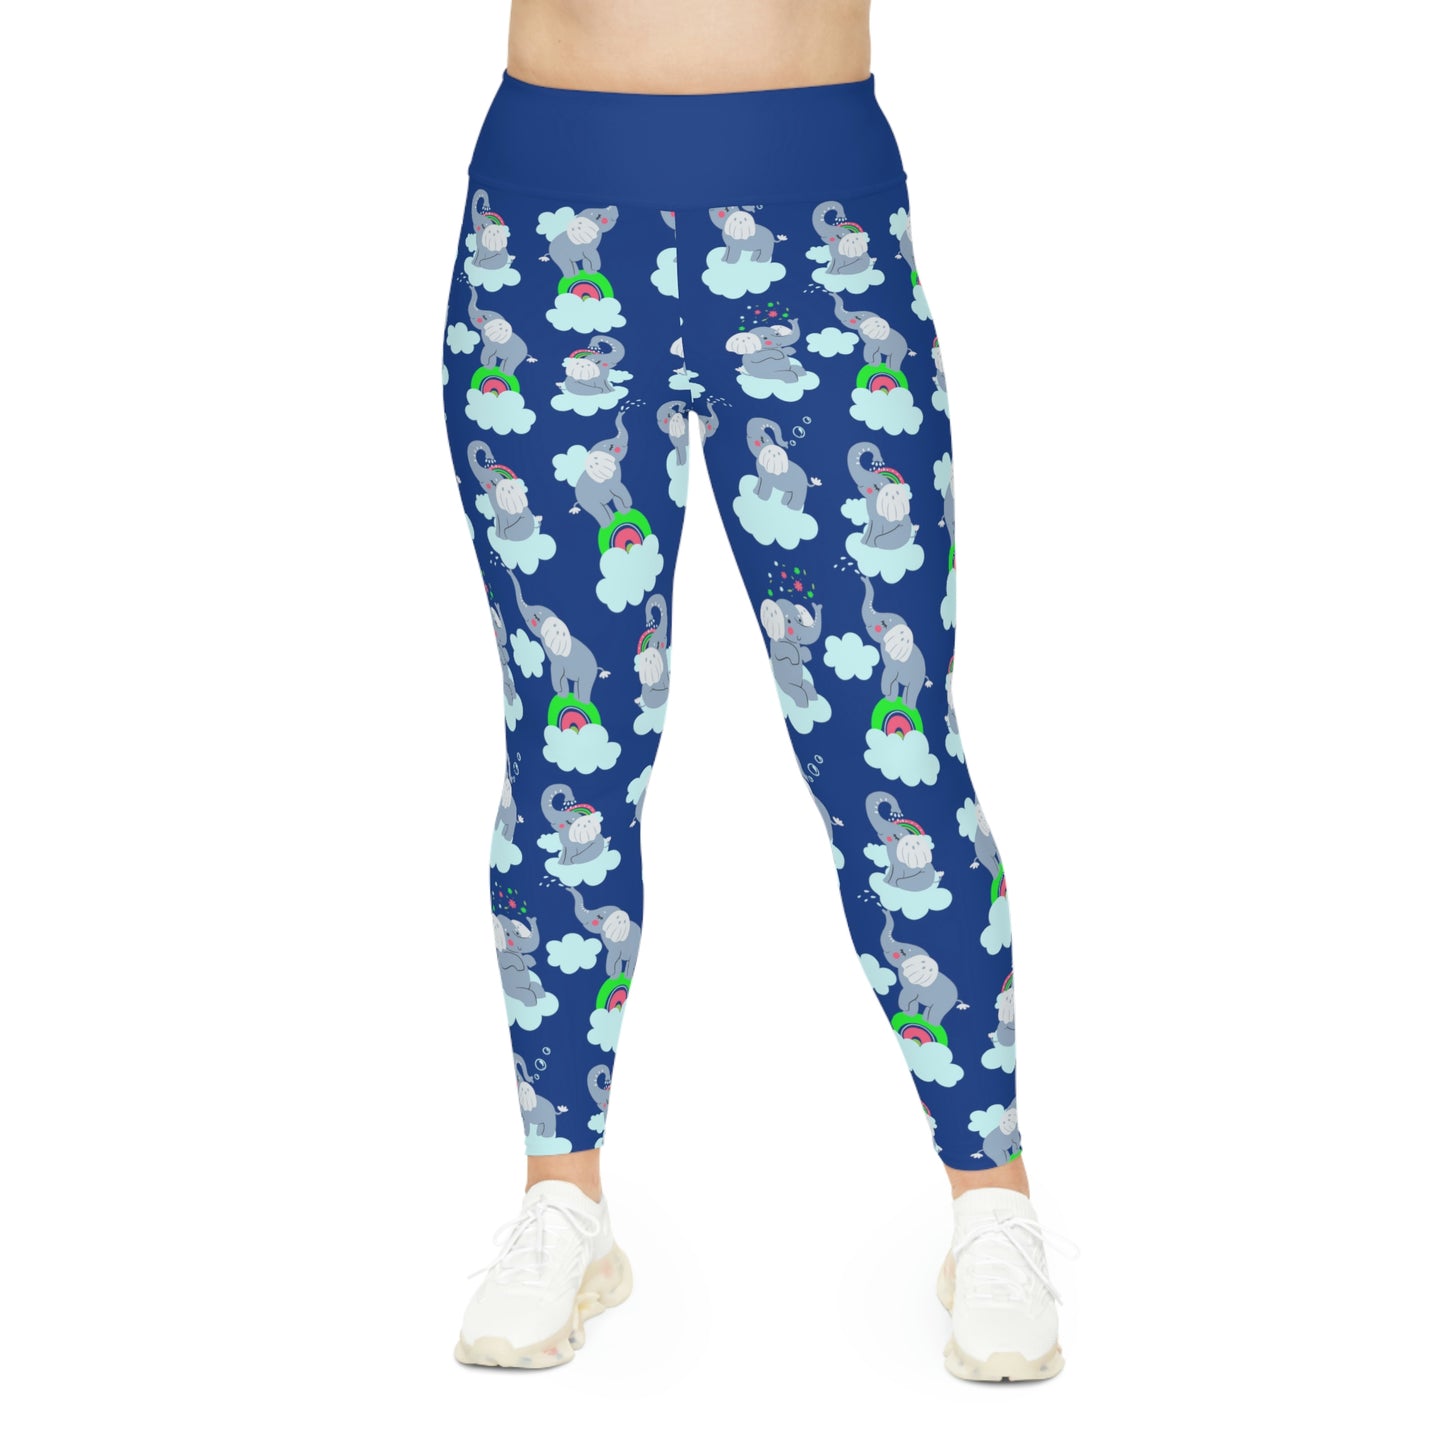 Elephant Plus Size Leggings animal kingdom, One of a Kind Workout Activewear for Wife Fitness, Best Friend, mom and me tights Christmas Gift